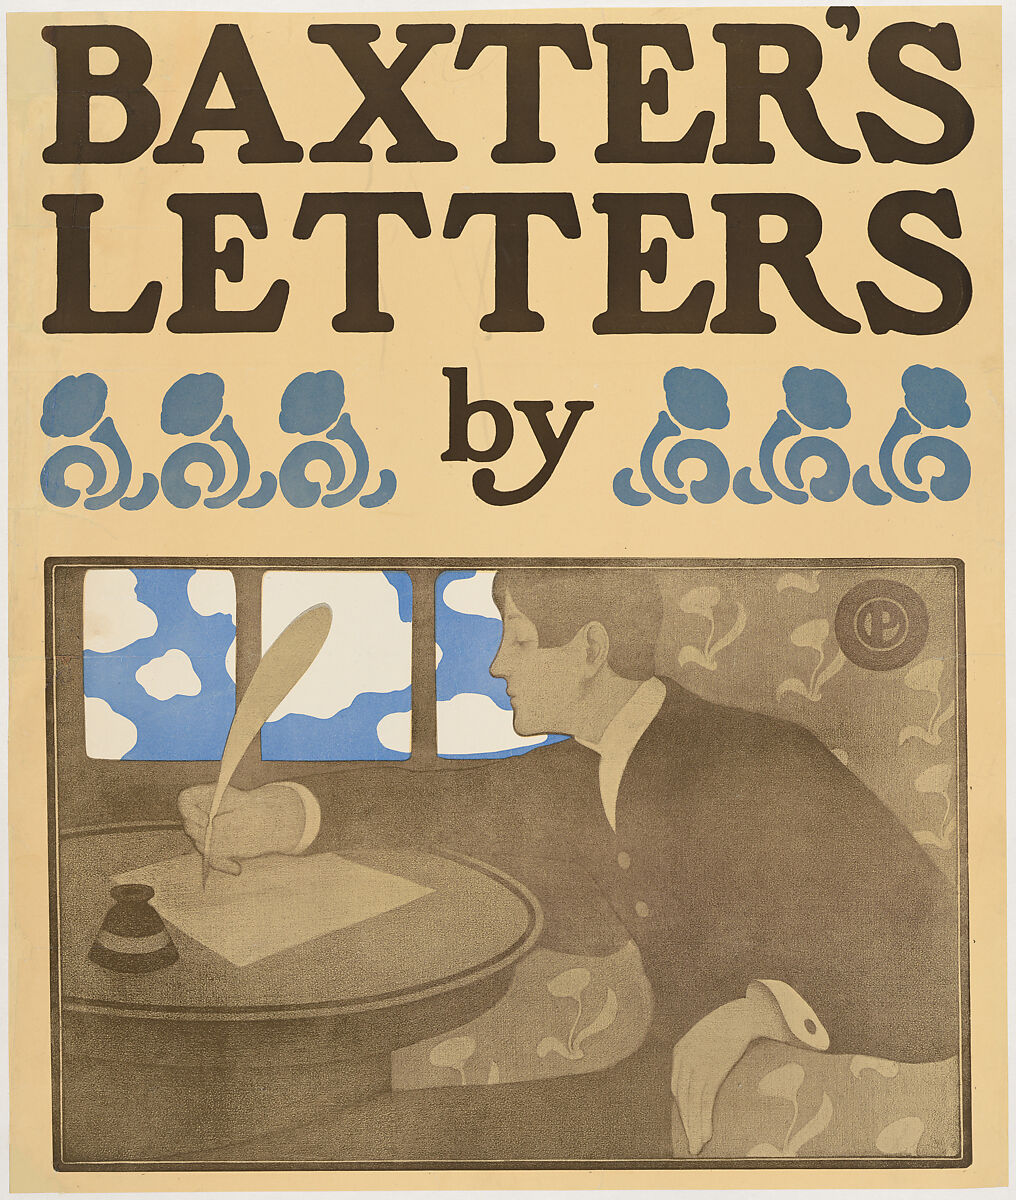 Baxter's Letters, Anonymous, American, 19th century, Lithograph 